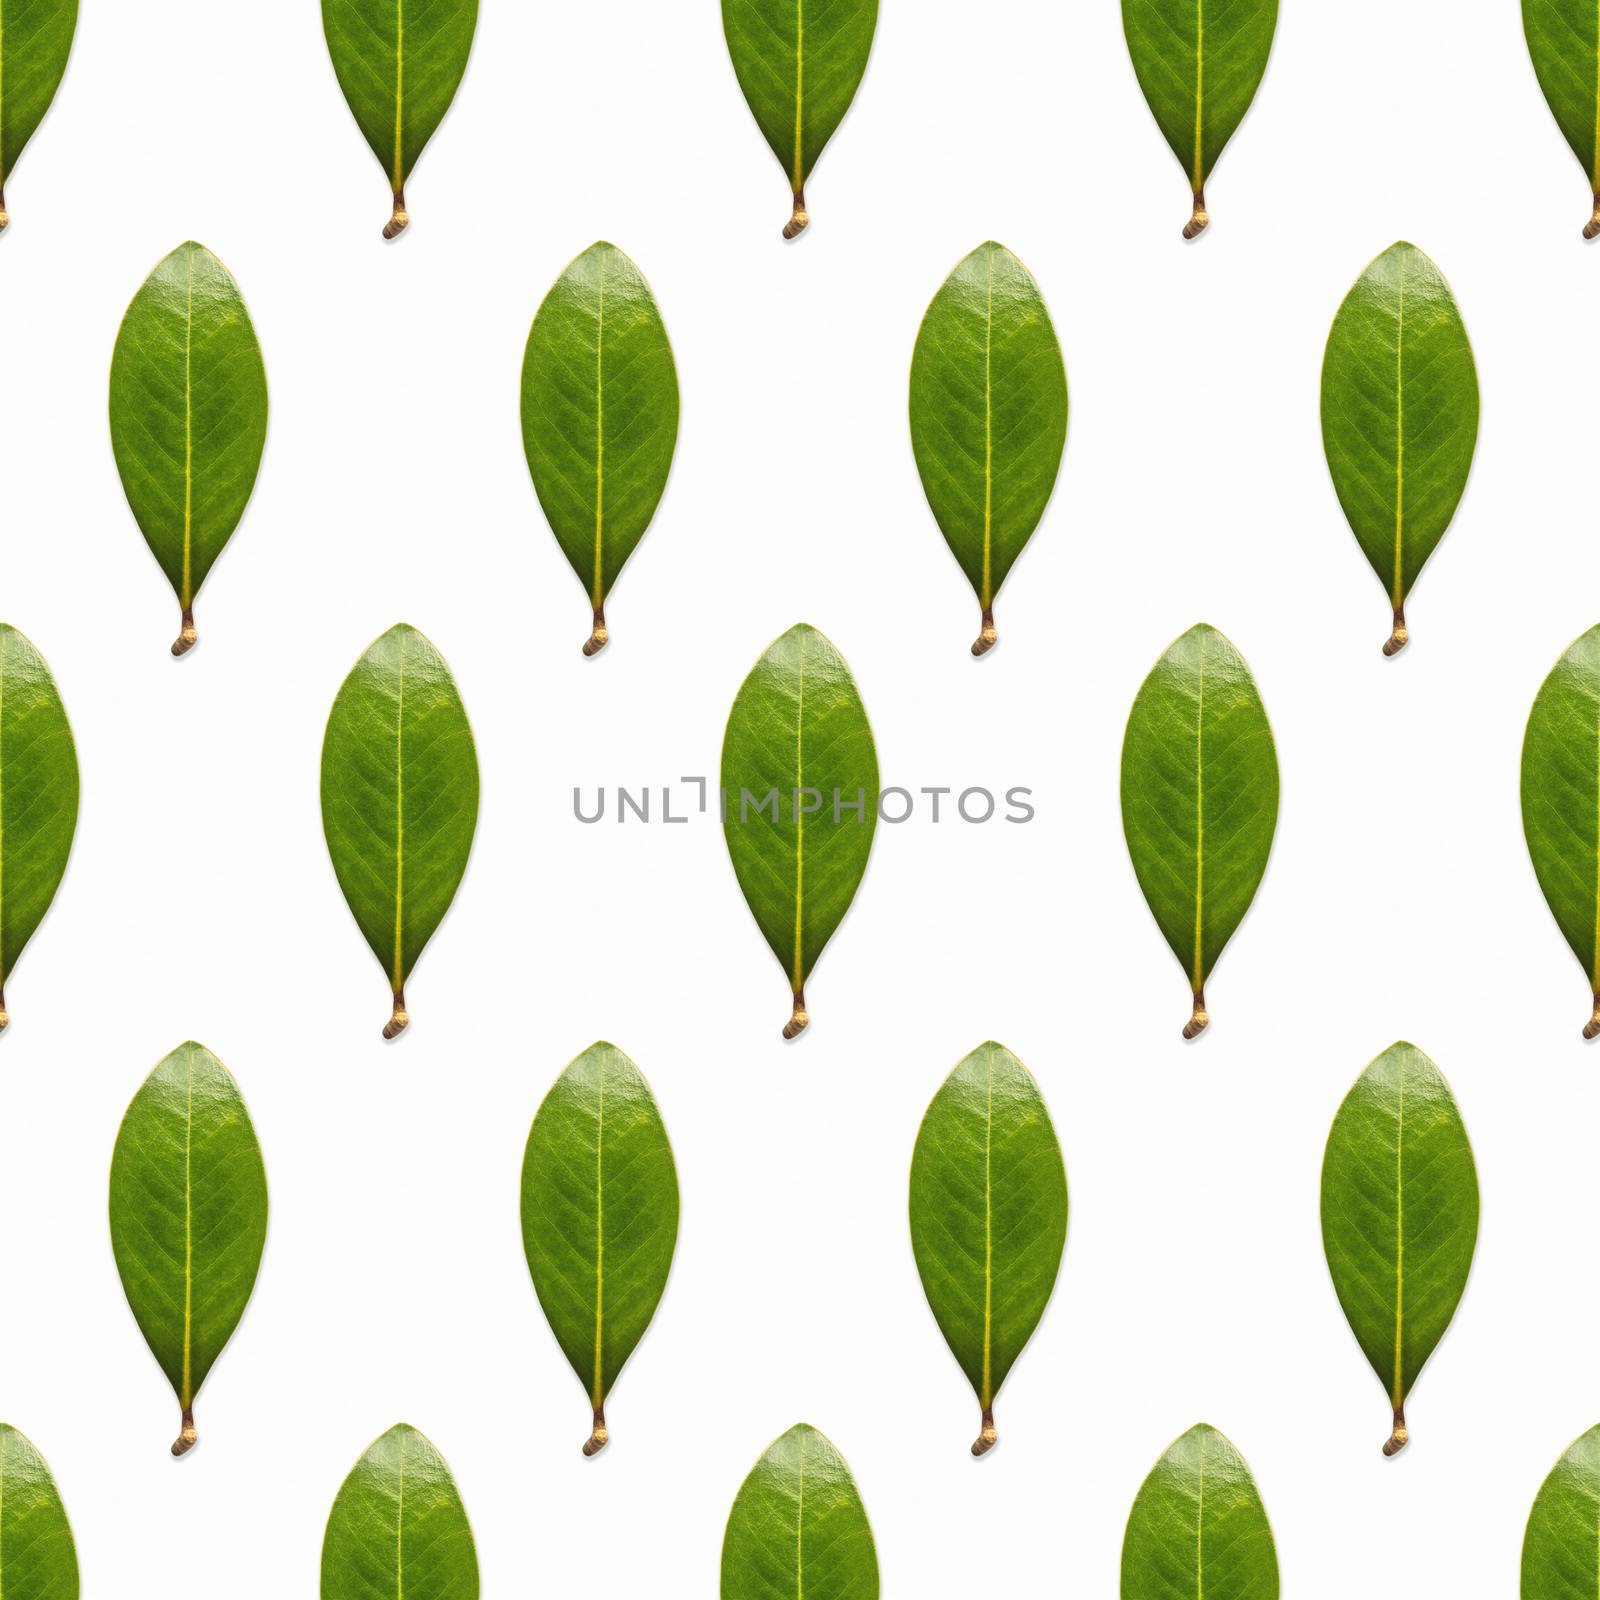 Seamless pattern made of photos of fresh green leaves. Natural background with scattered plants. by aksenovko